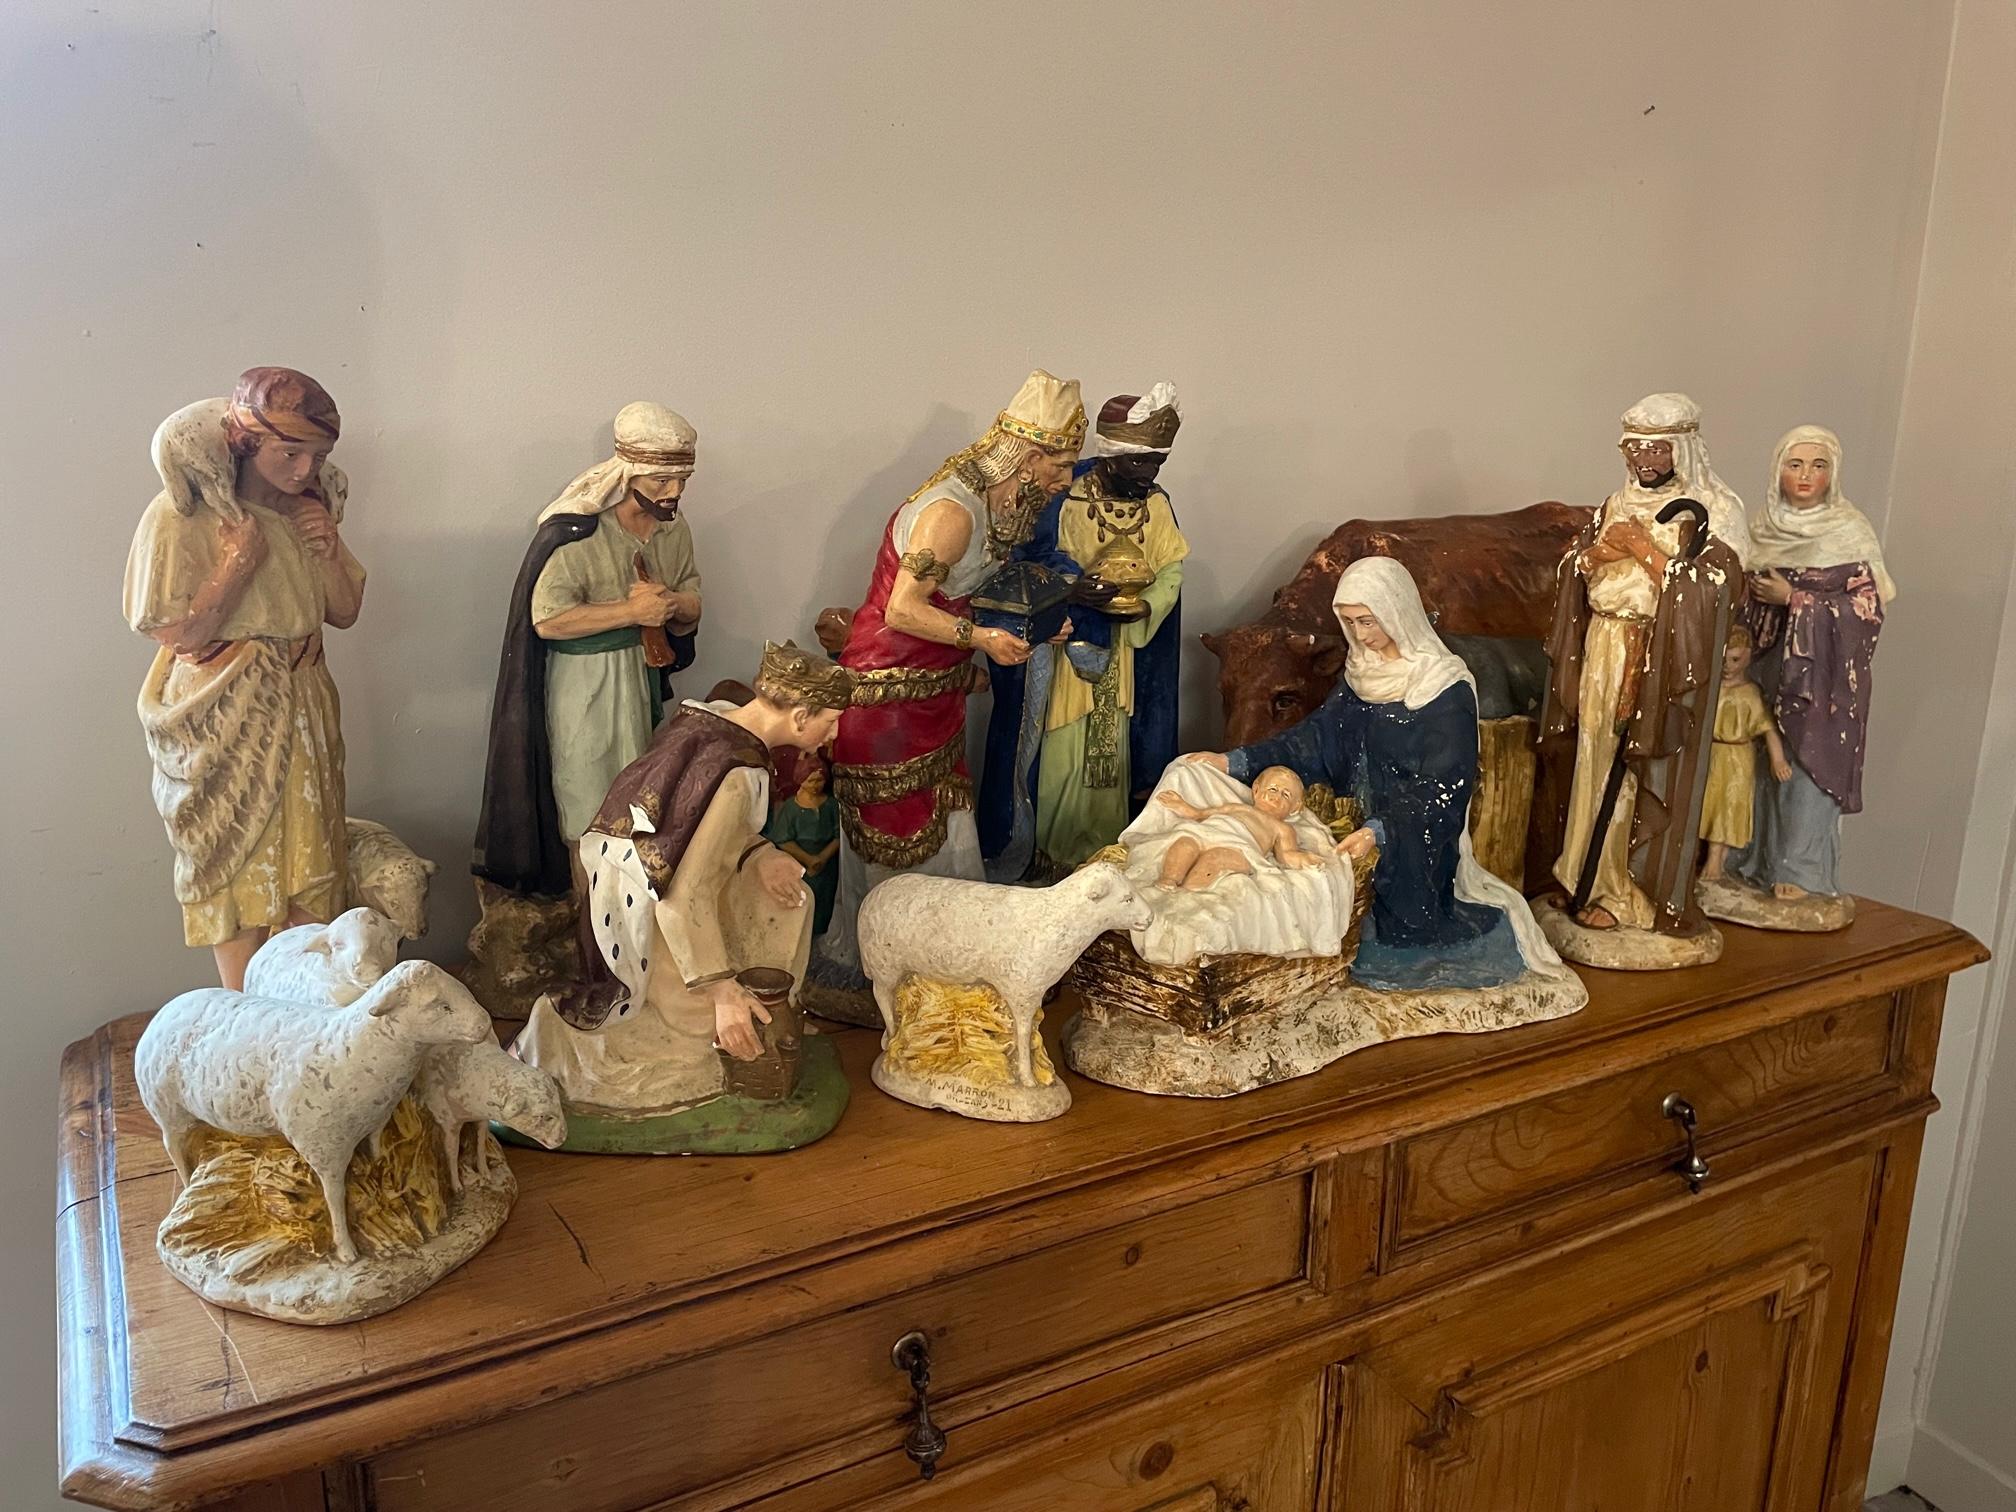 Very nice and rare 20th century French set of plaster nativity scene figurines. 
Twelve pieces are representing the religious nativity characters and the animals. 
Large dimensions. Show some minor losses and the paint is fading but good general